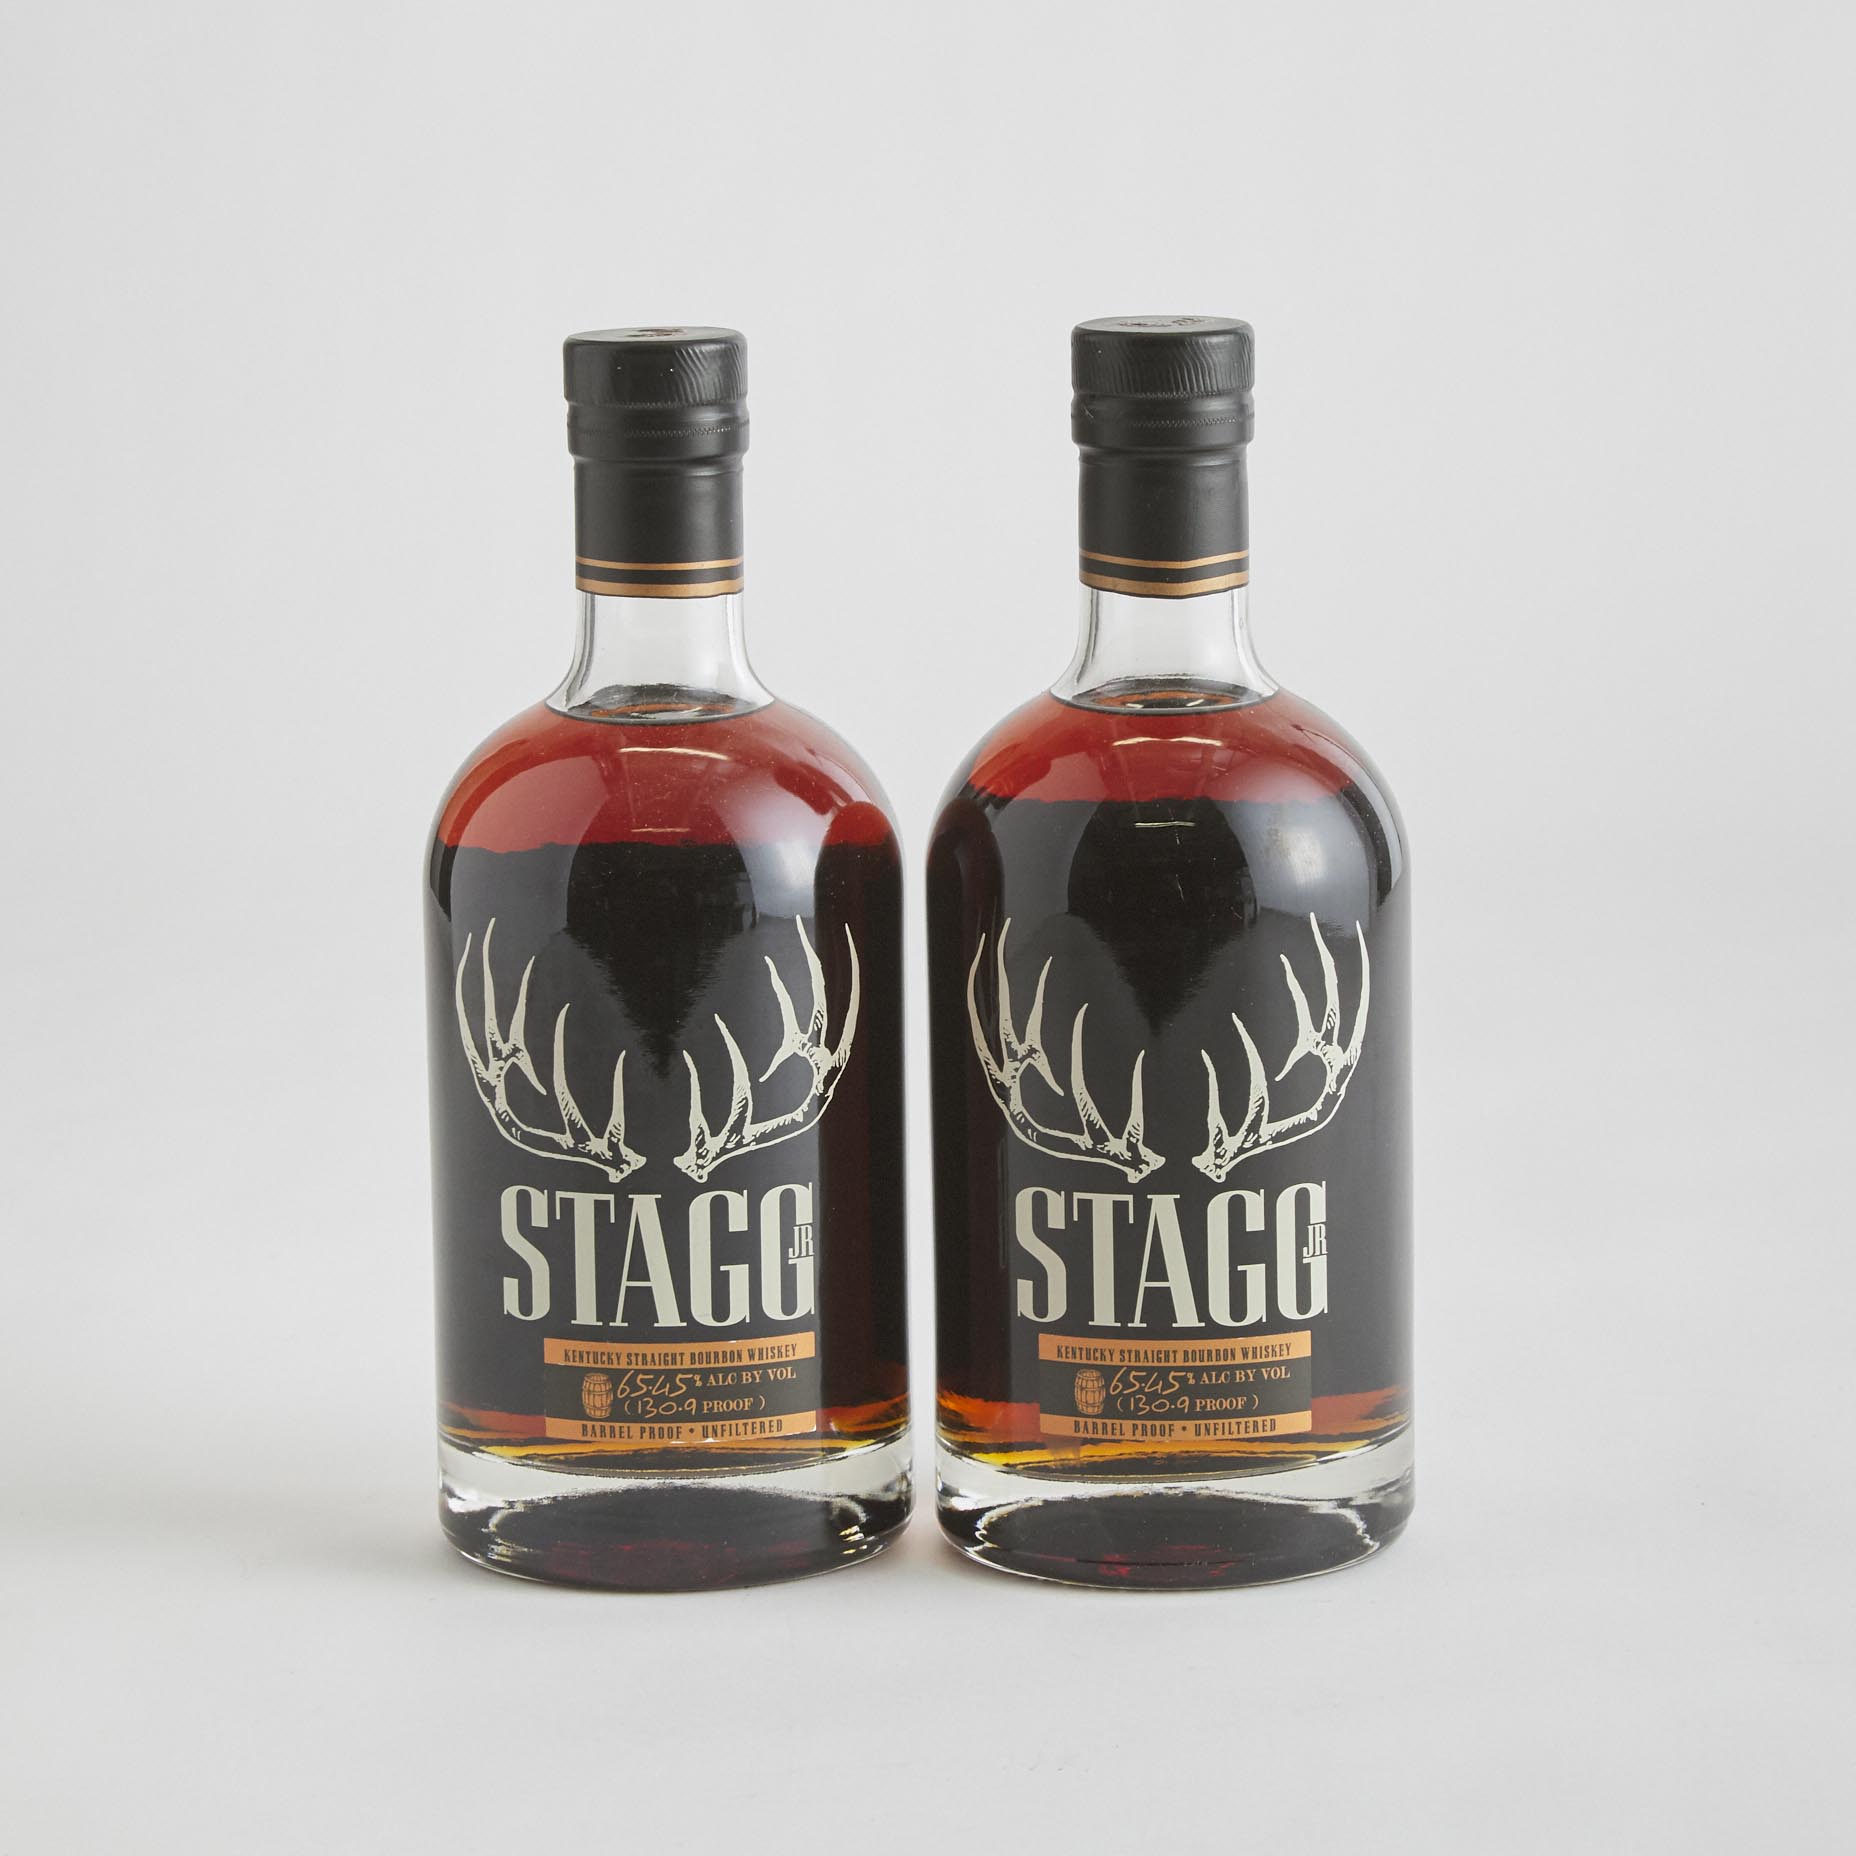 STAGG JR KENTUCKY STRAIGHT BOURBON WHISKY (TWO 750 ML)